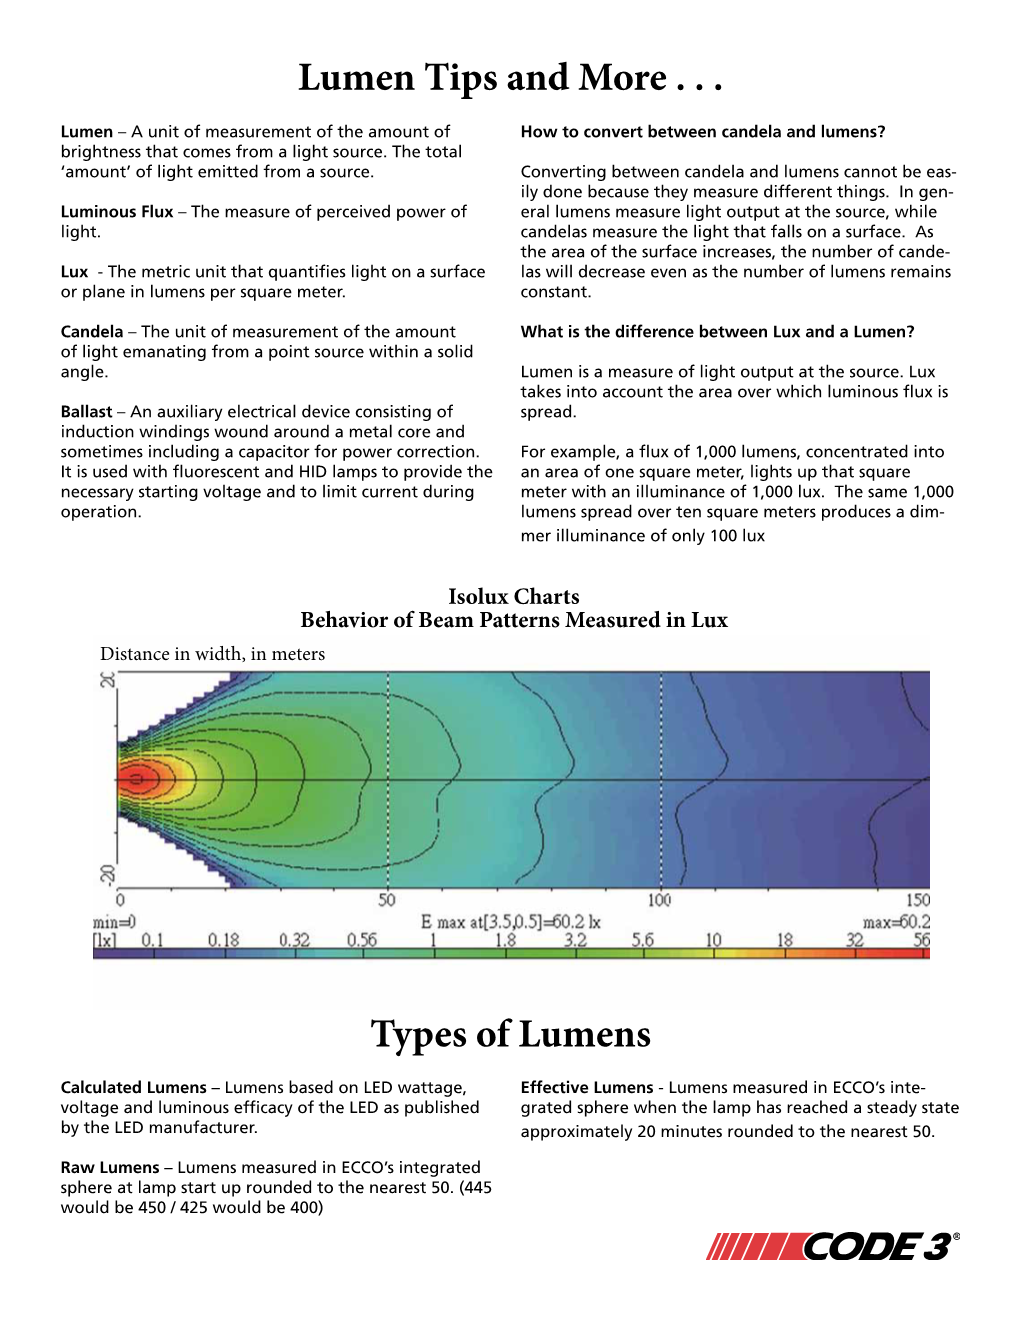 Lumen Tips and More . . . Types of Lumens